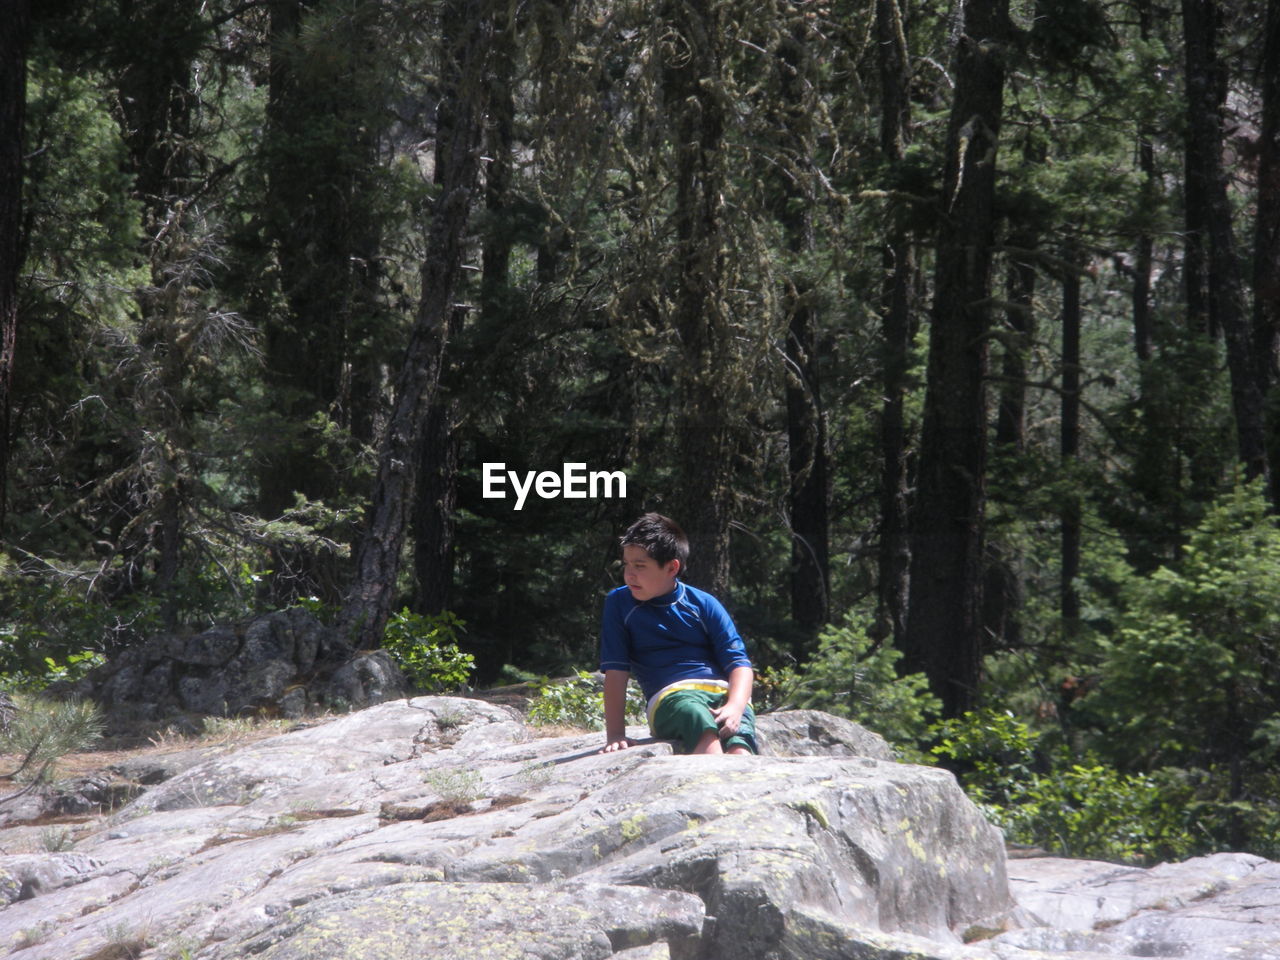 Boy looking away while sitting on rock in forest